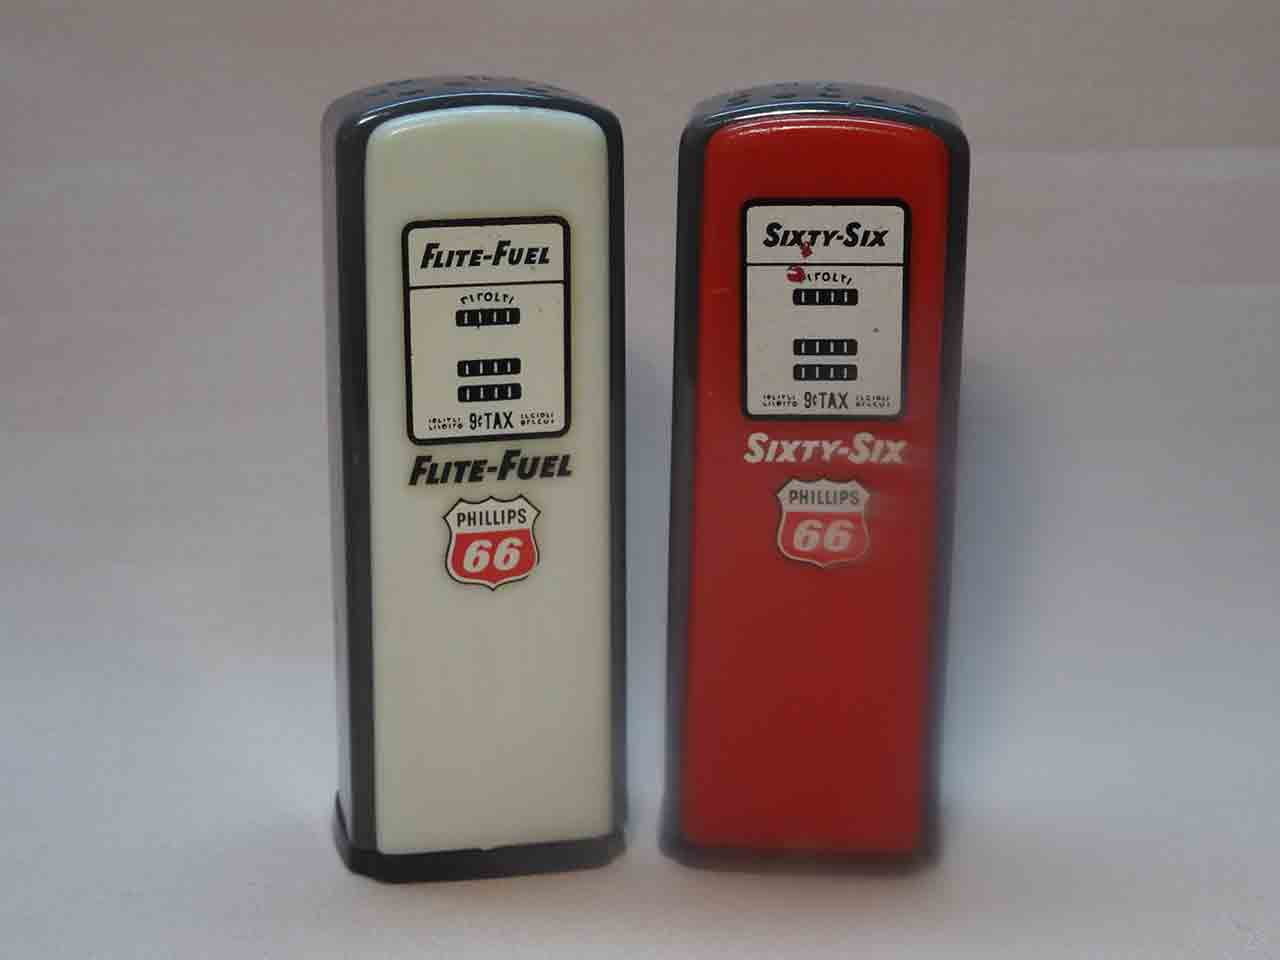 Plastic advertising gas pumps salt and pepper shakers - Phillips 66